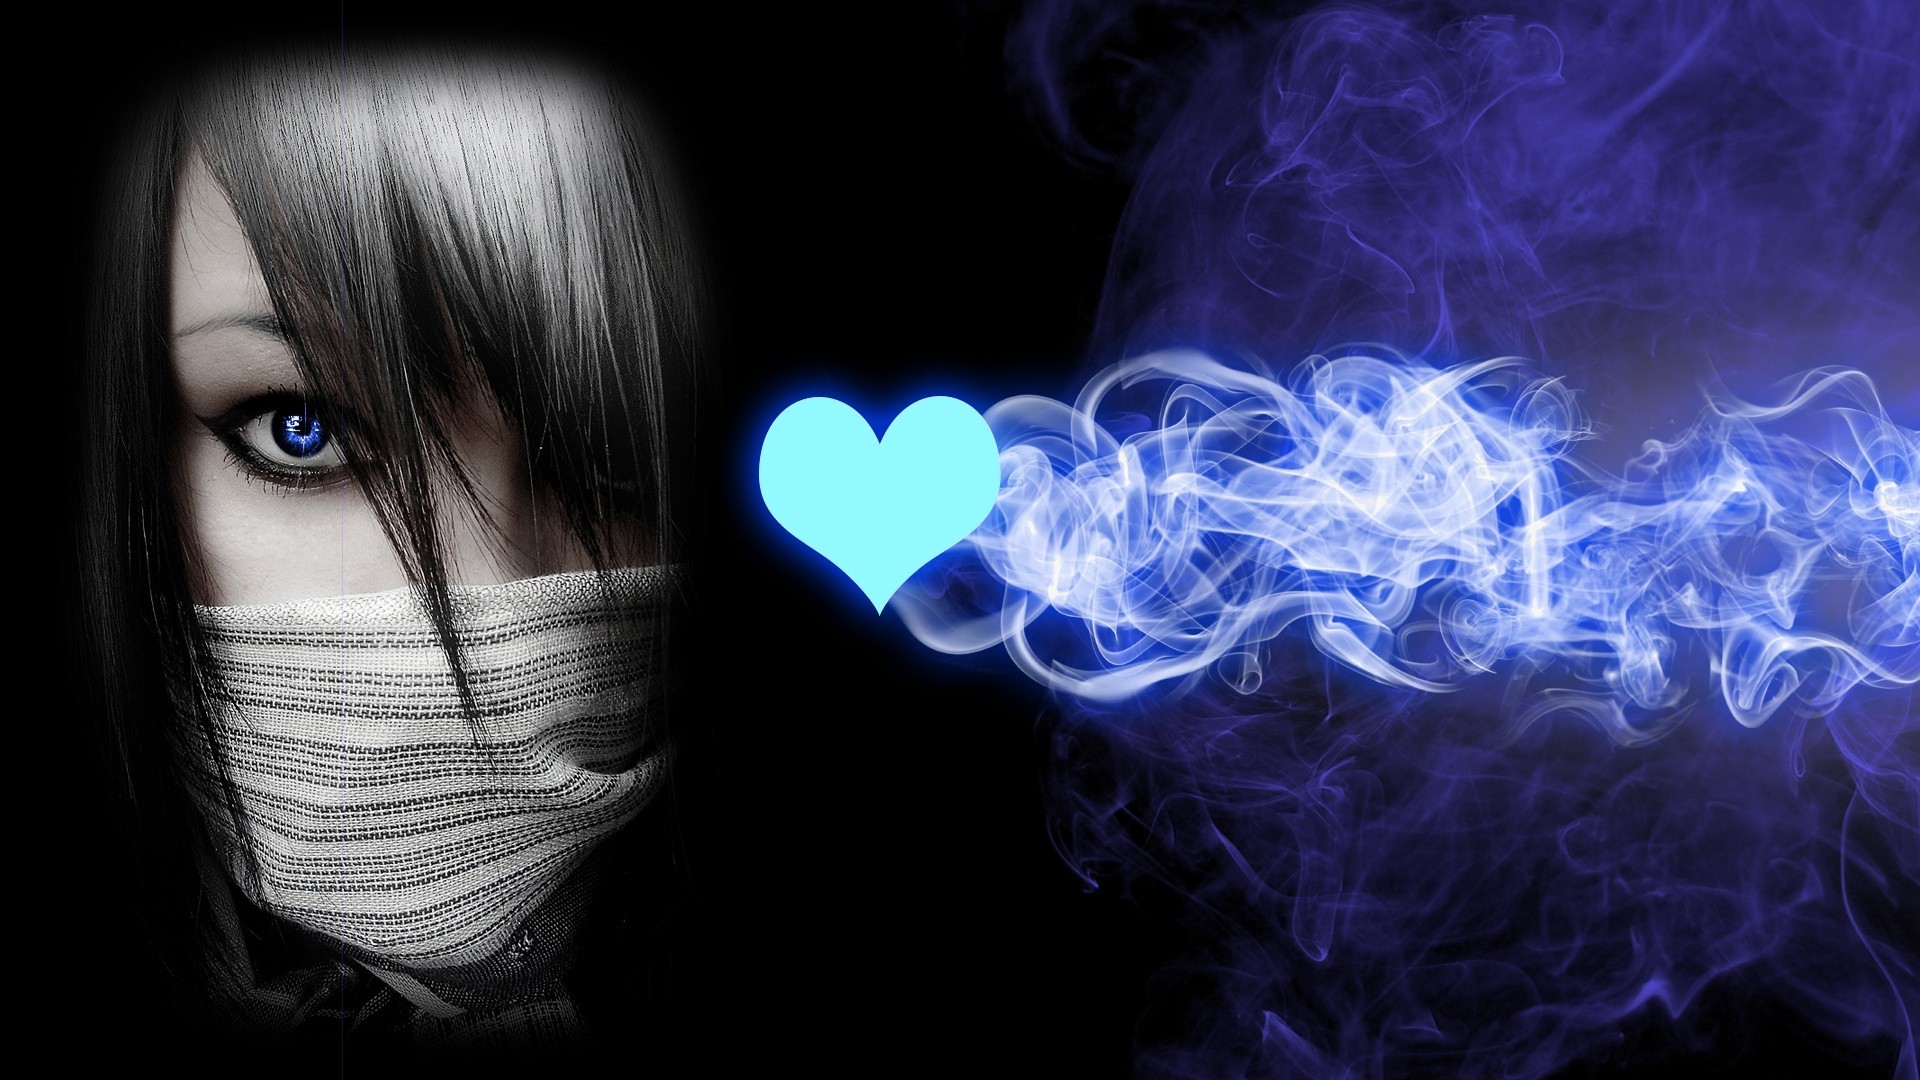 Free Emo Girl Hd Wallpapers Mobile Src Emo Love Wallpaper - Girl With A  Mask - 1920x1080 Wallpaper 